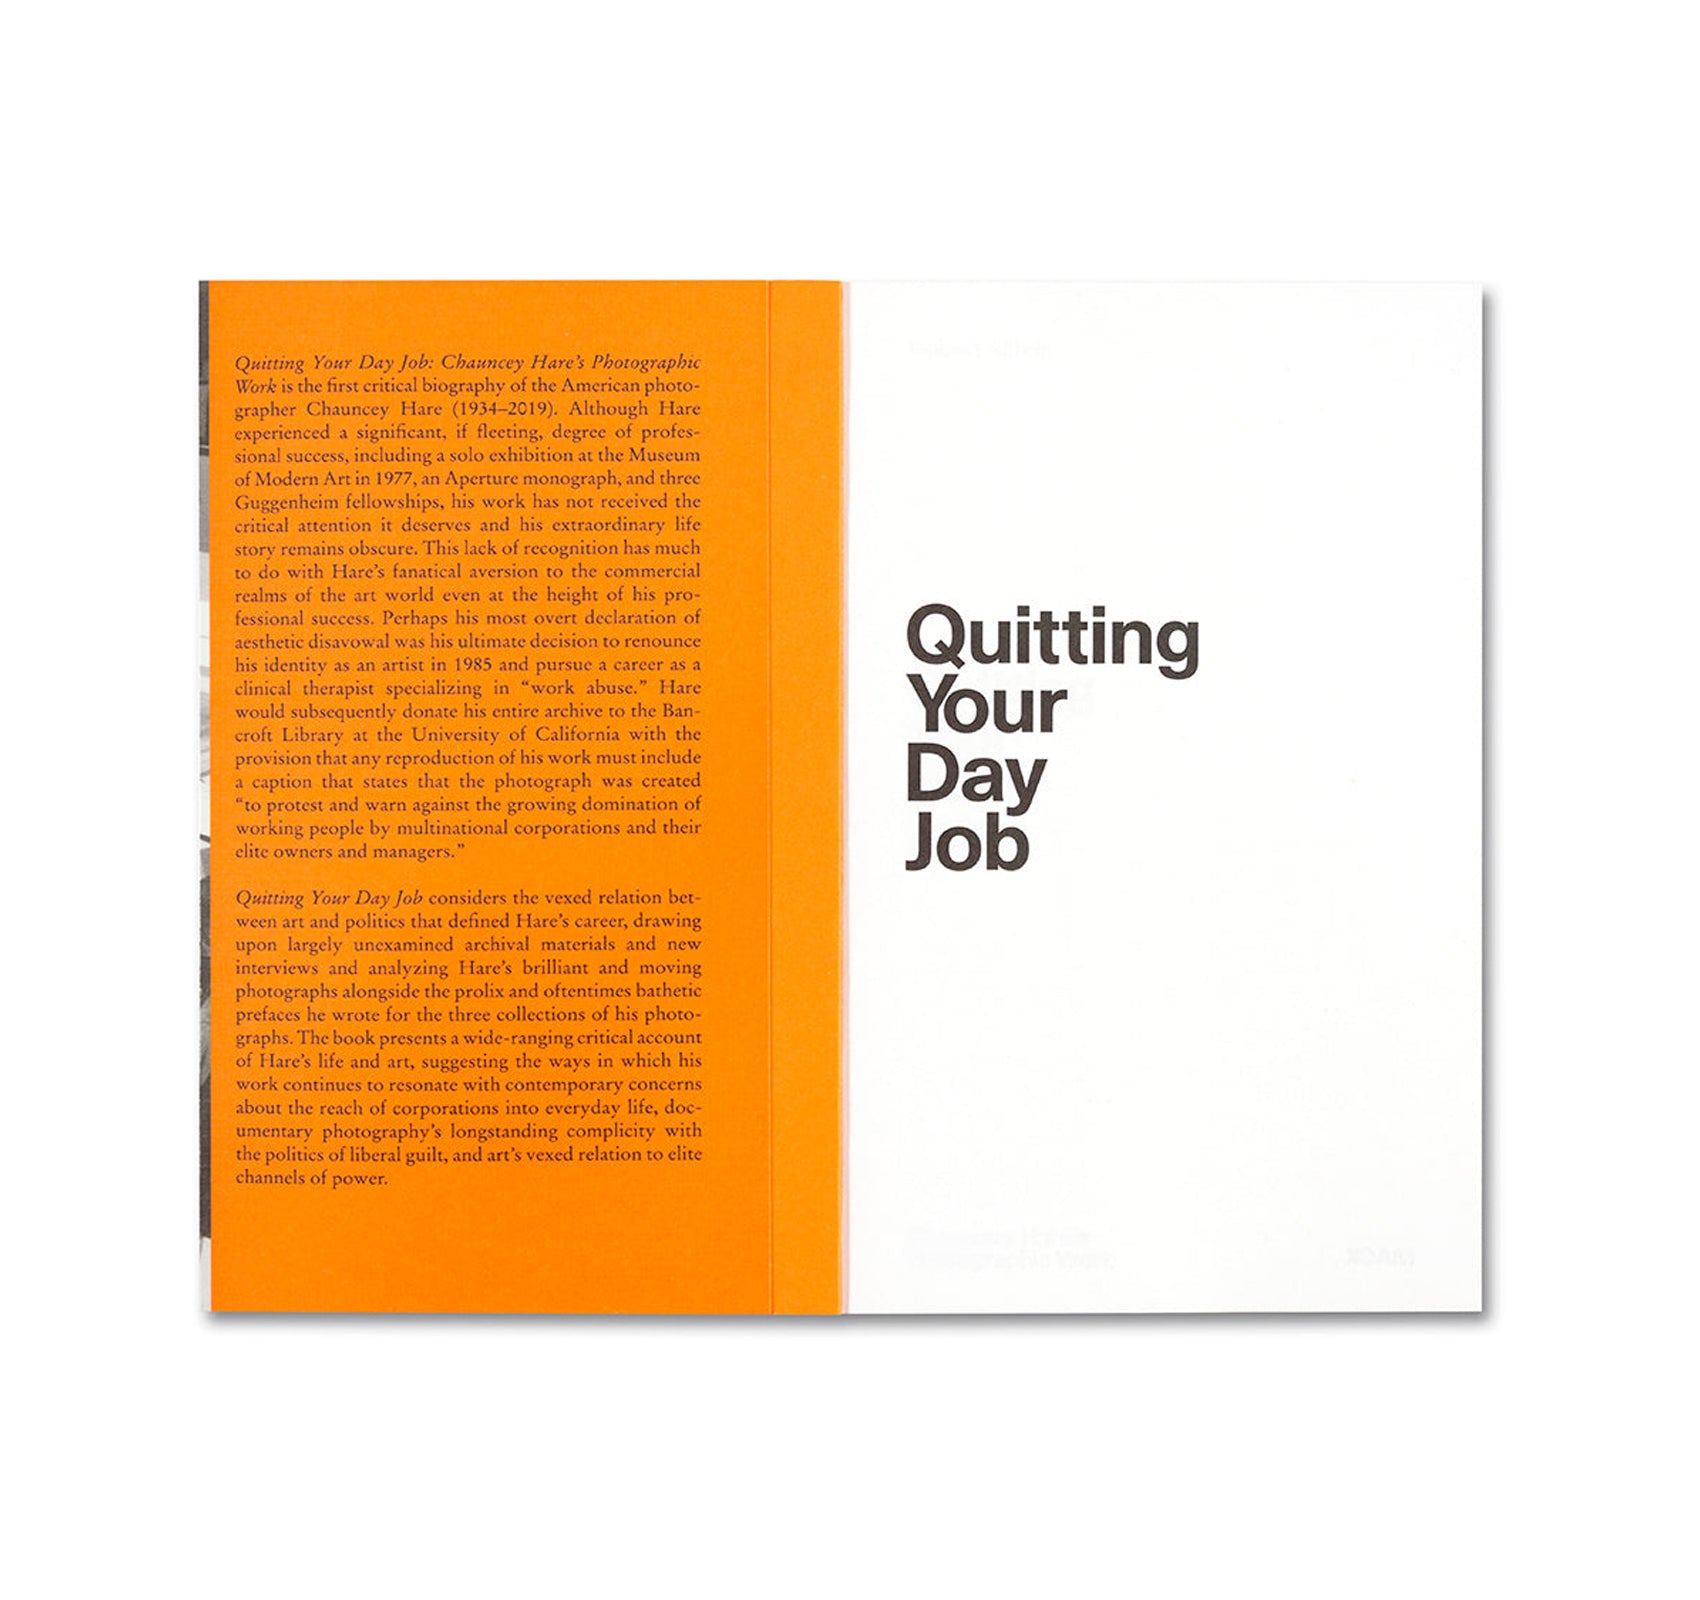 QUITTING YOUR DAY JOB: CHAUNCEY HARE’S PHOTOGRAPHIC WORK by Chauncey Hare